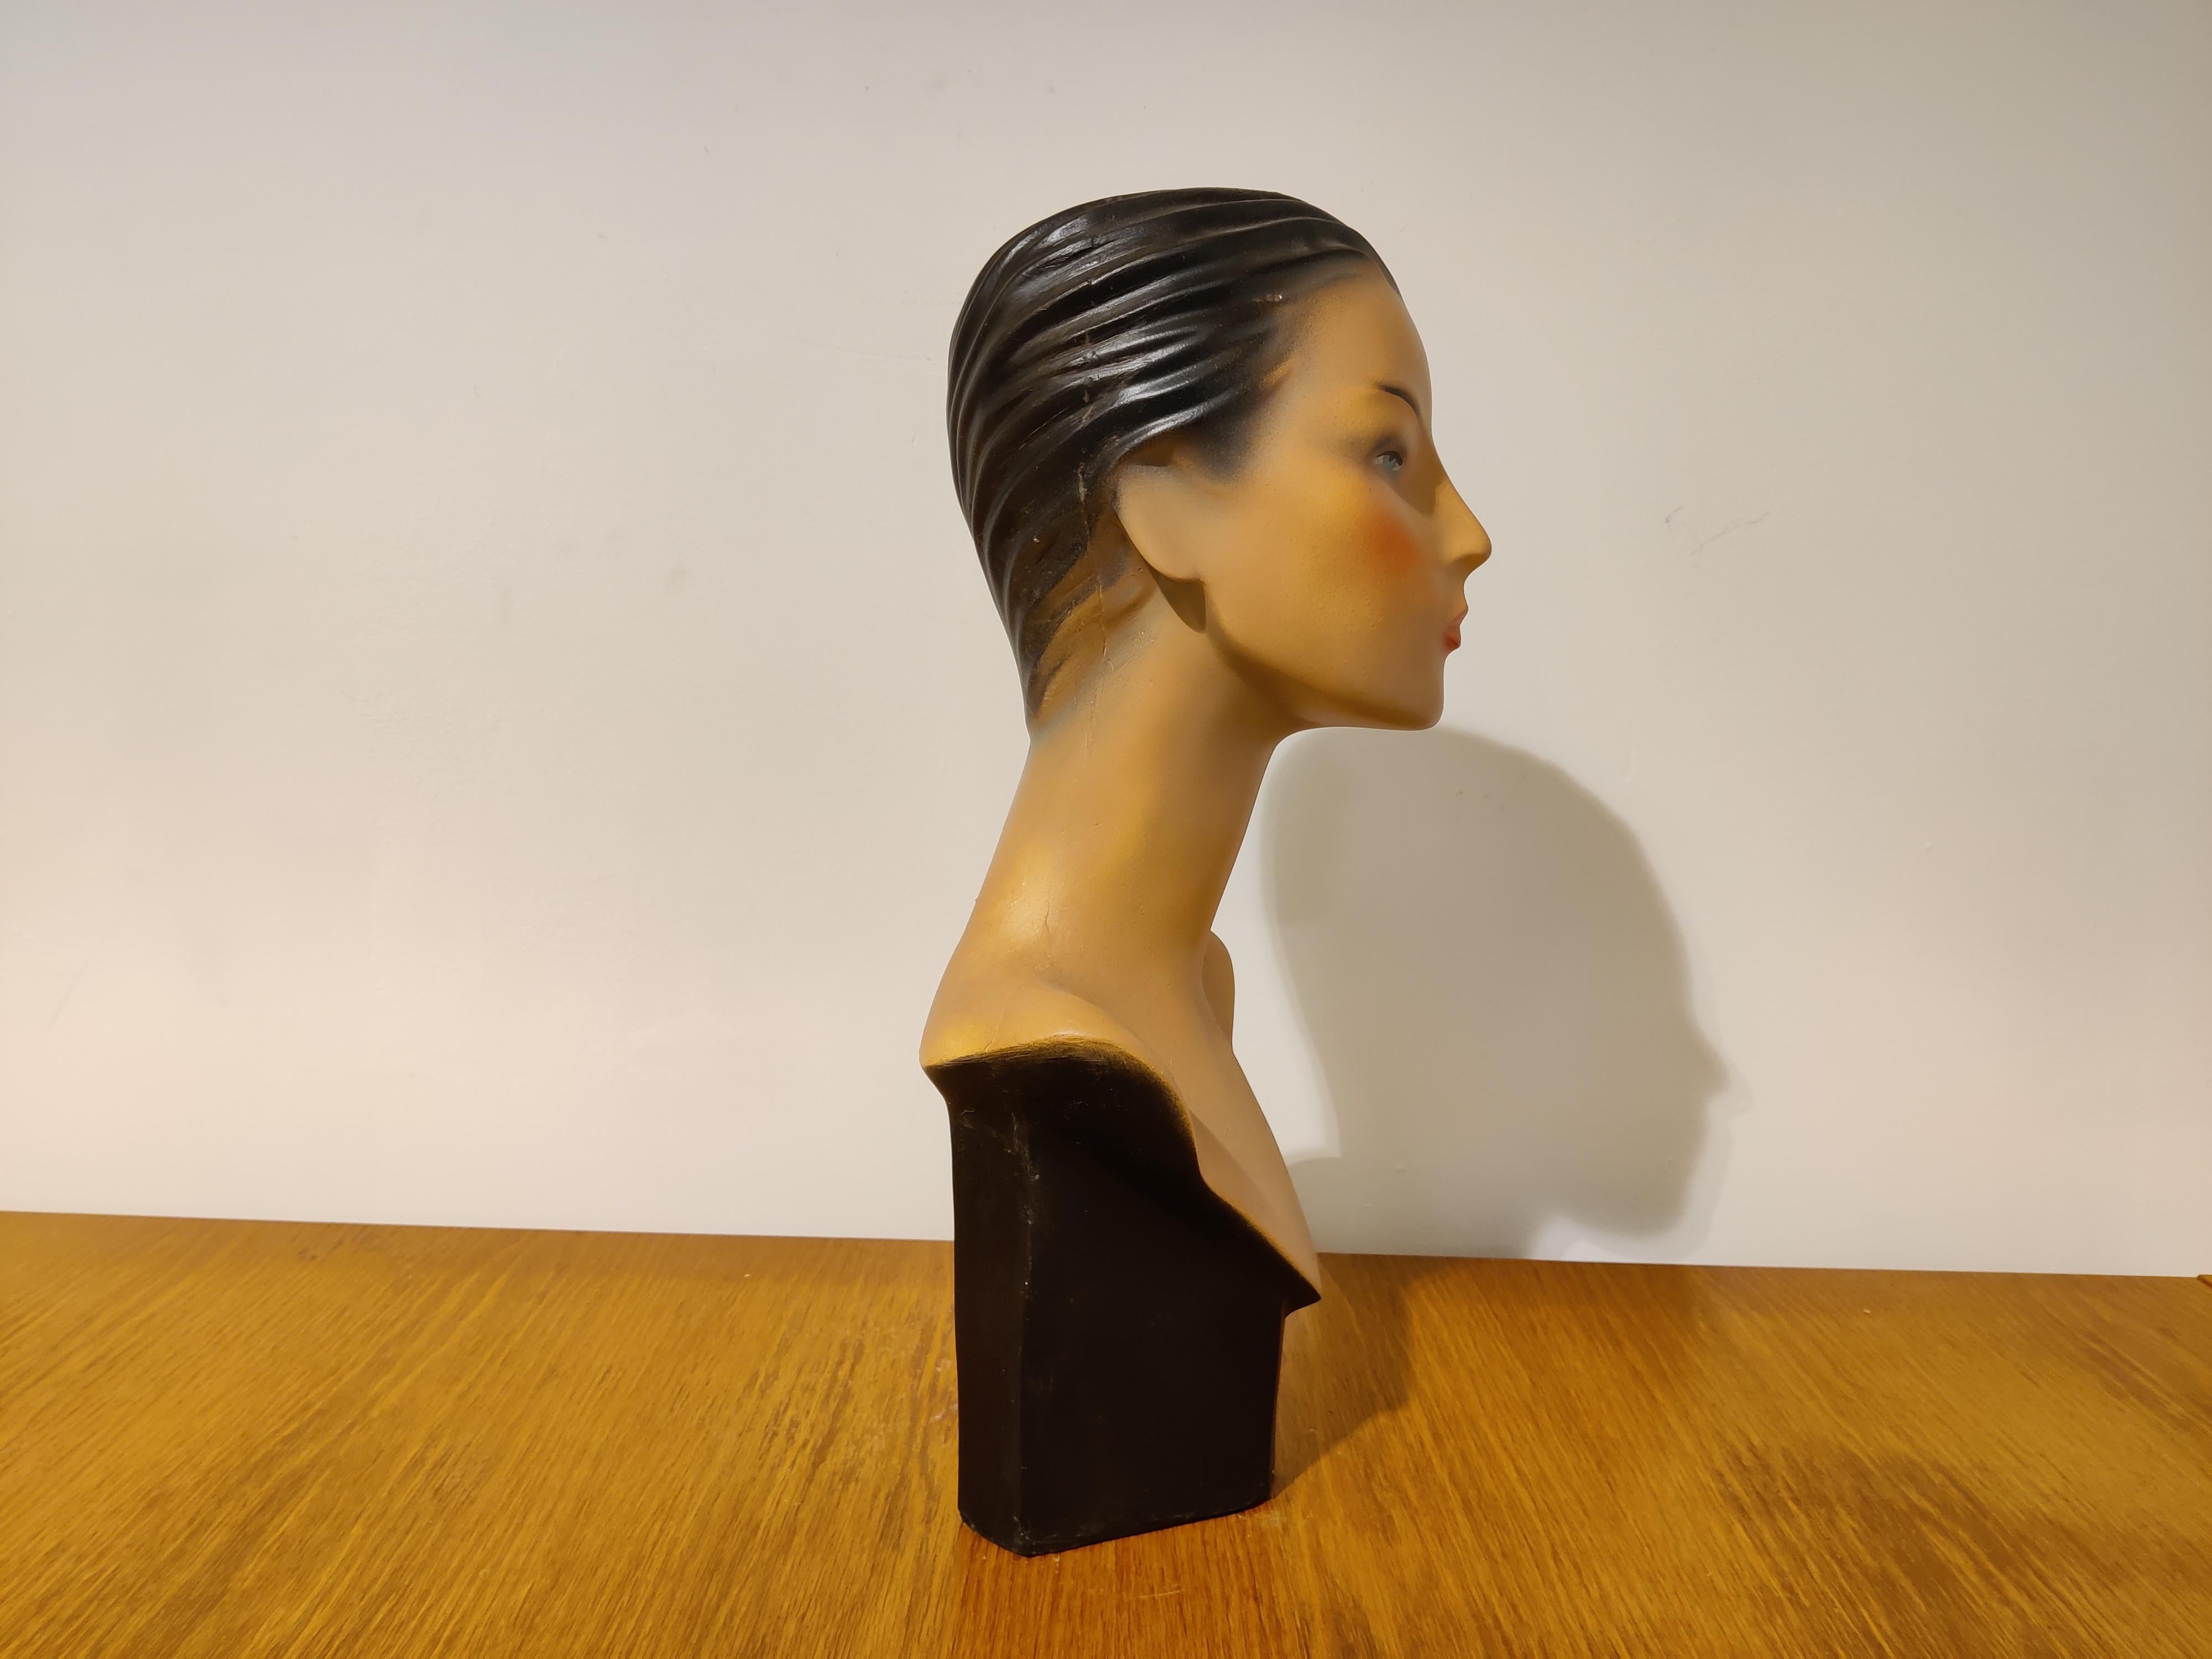 Beautiful female Art Deco style mannequin bust made from plaster served as a shop display.

It has some minor user traces.

Comes from a lot acquired from a clothes shop that stopped activities.

Great decorative item to display glasses,